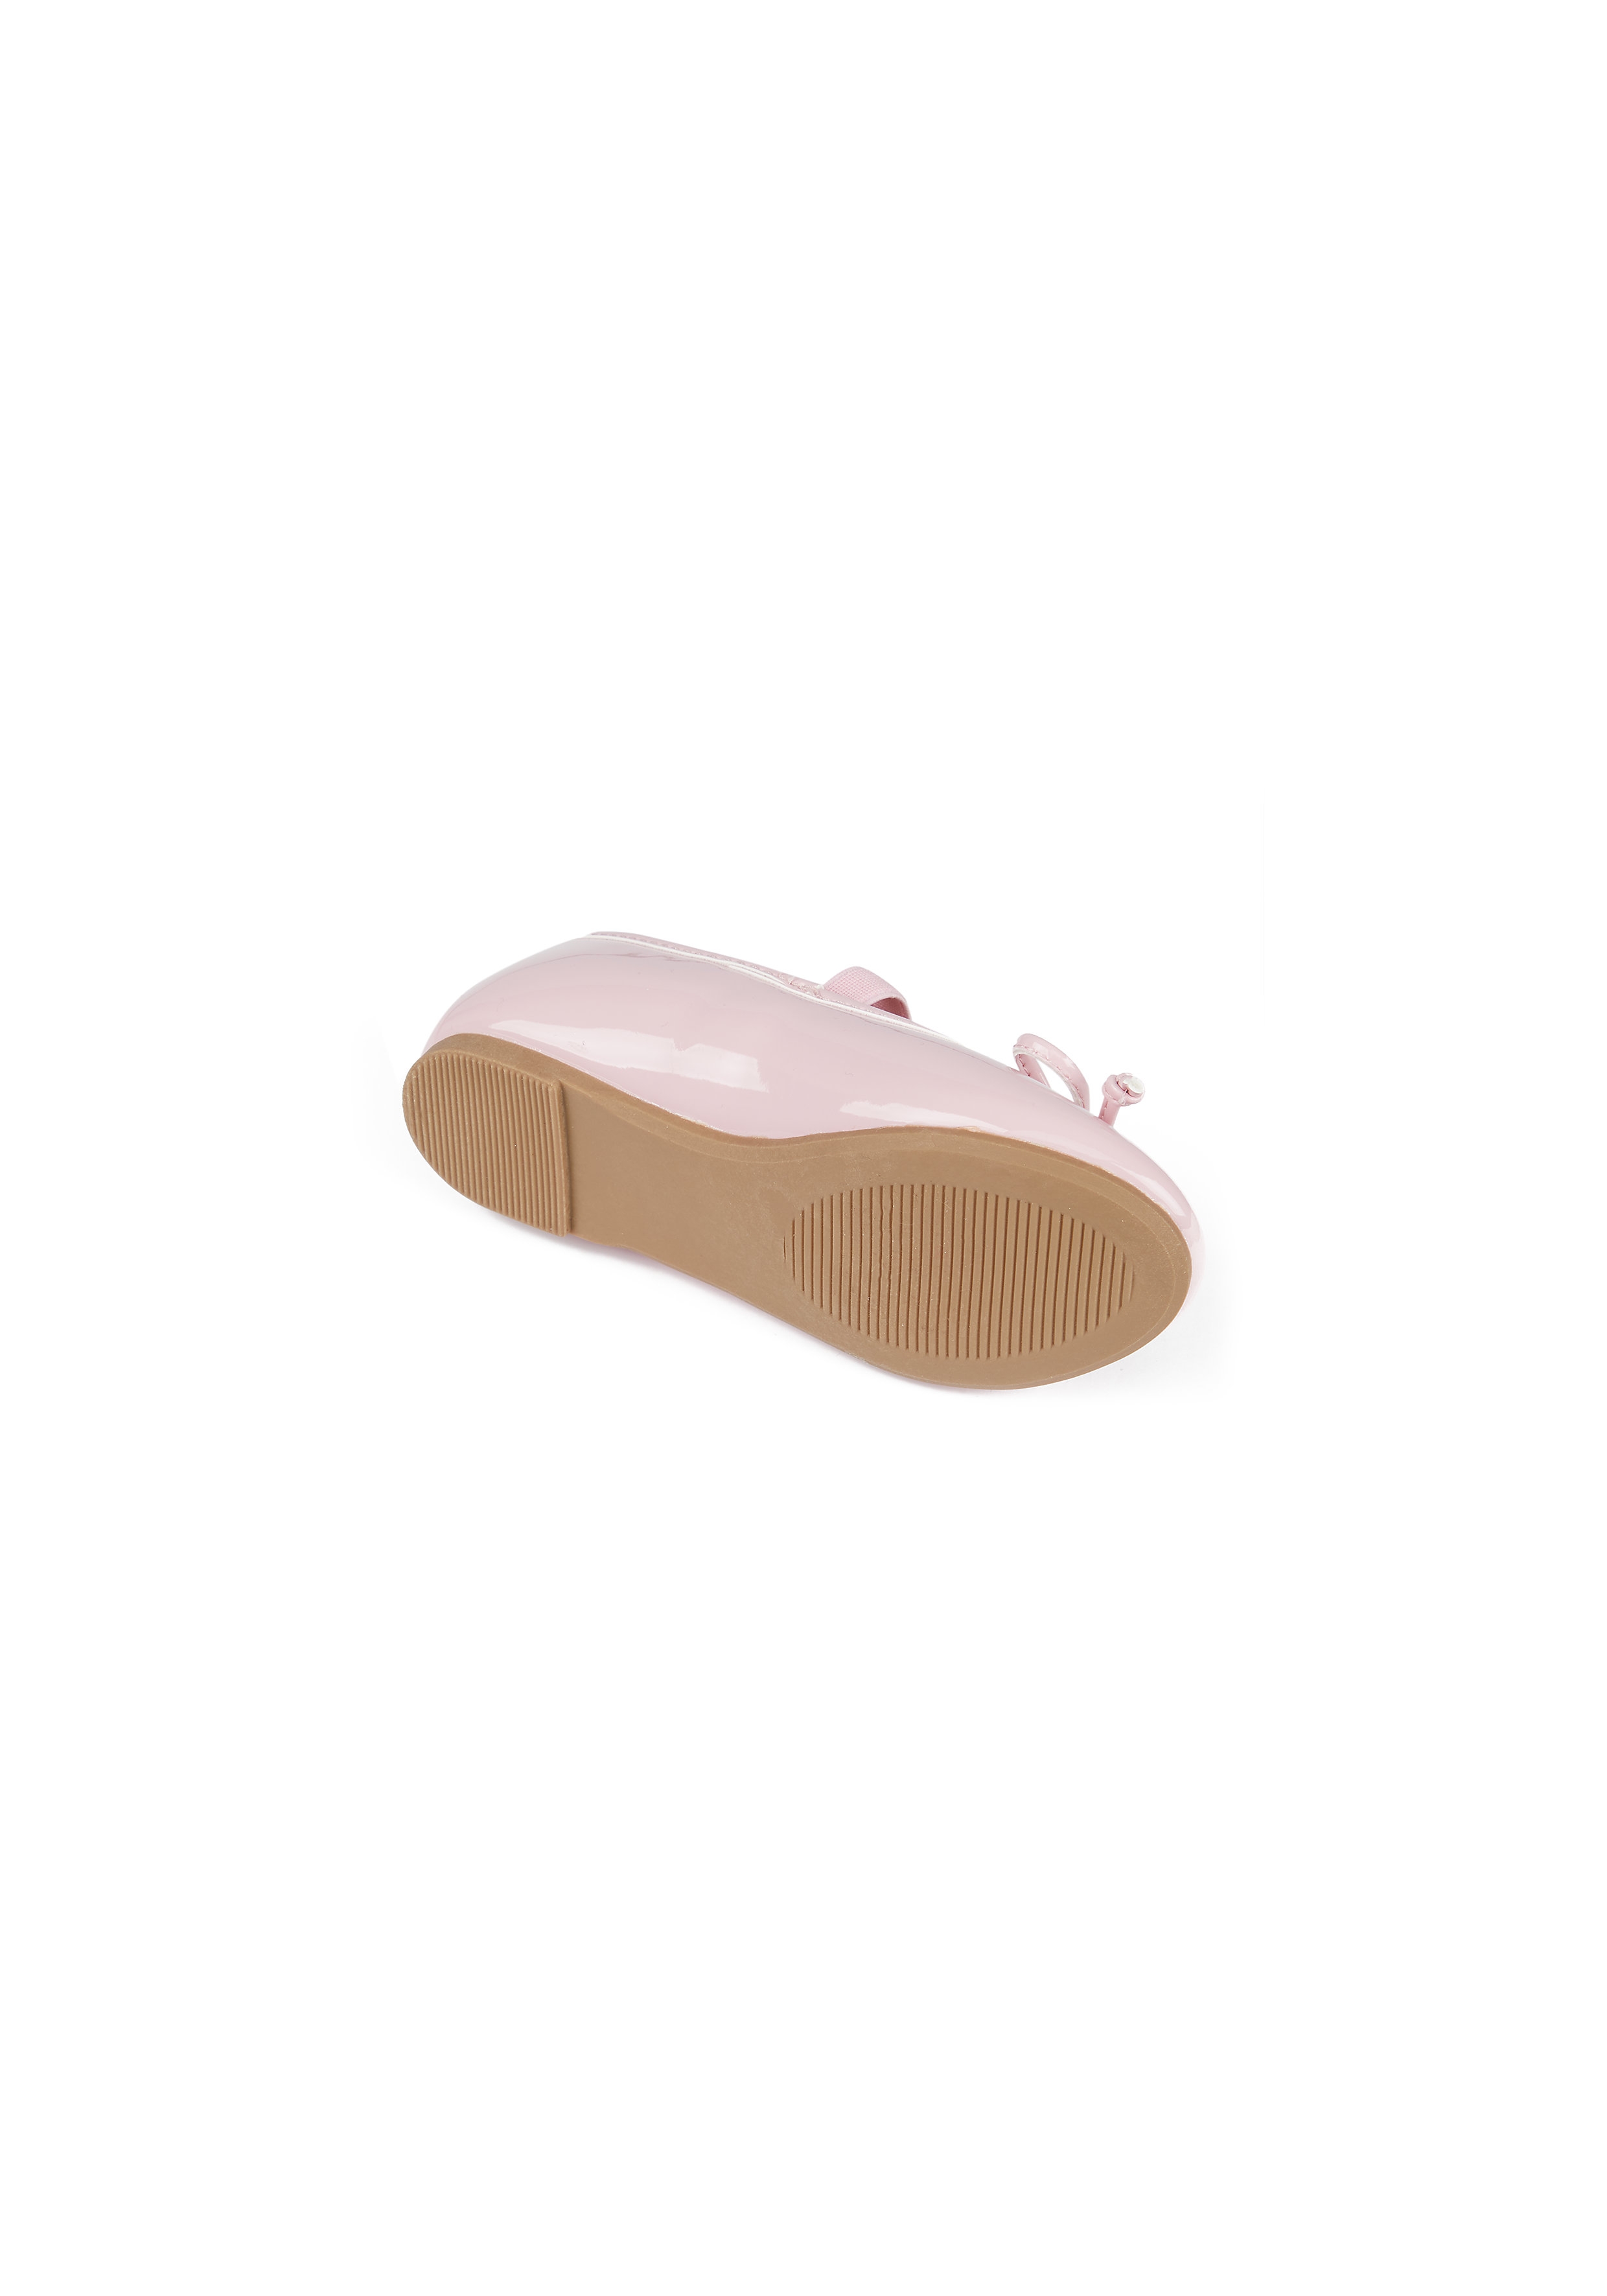 Mothercare | Girls Ballerina Shoes Bow Detail - Pink 2